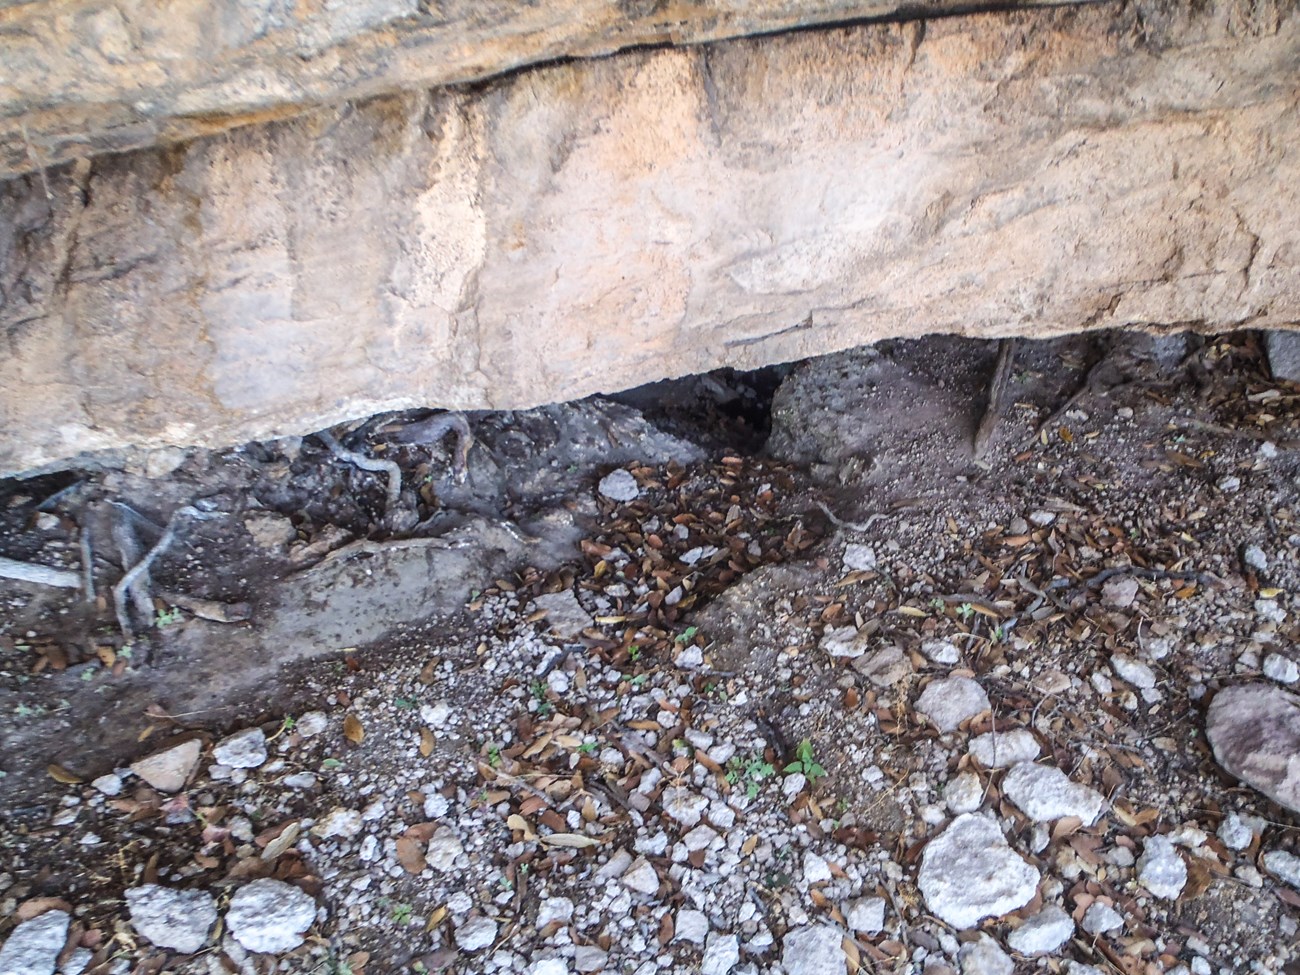 Beneath a rock overhang is bare ground with scattered dirt, gravel, and leaves. A depression in the ground is visible but there is no water.